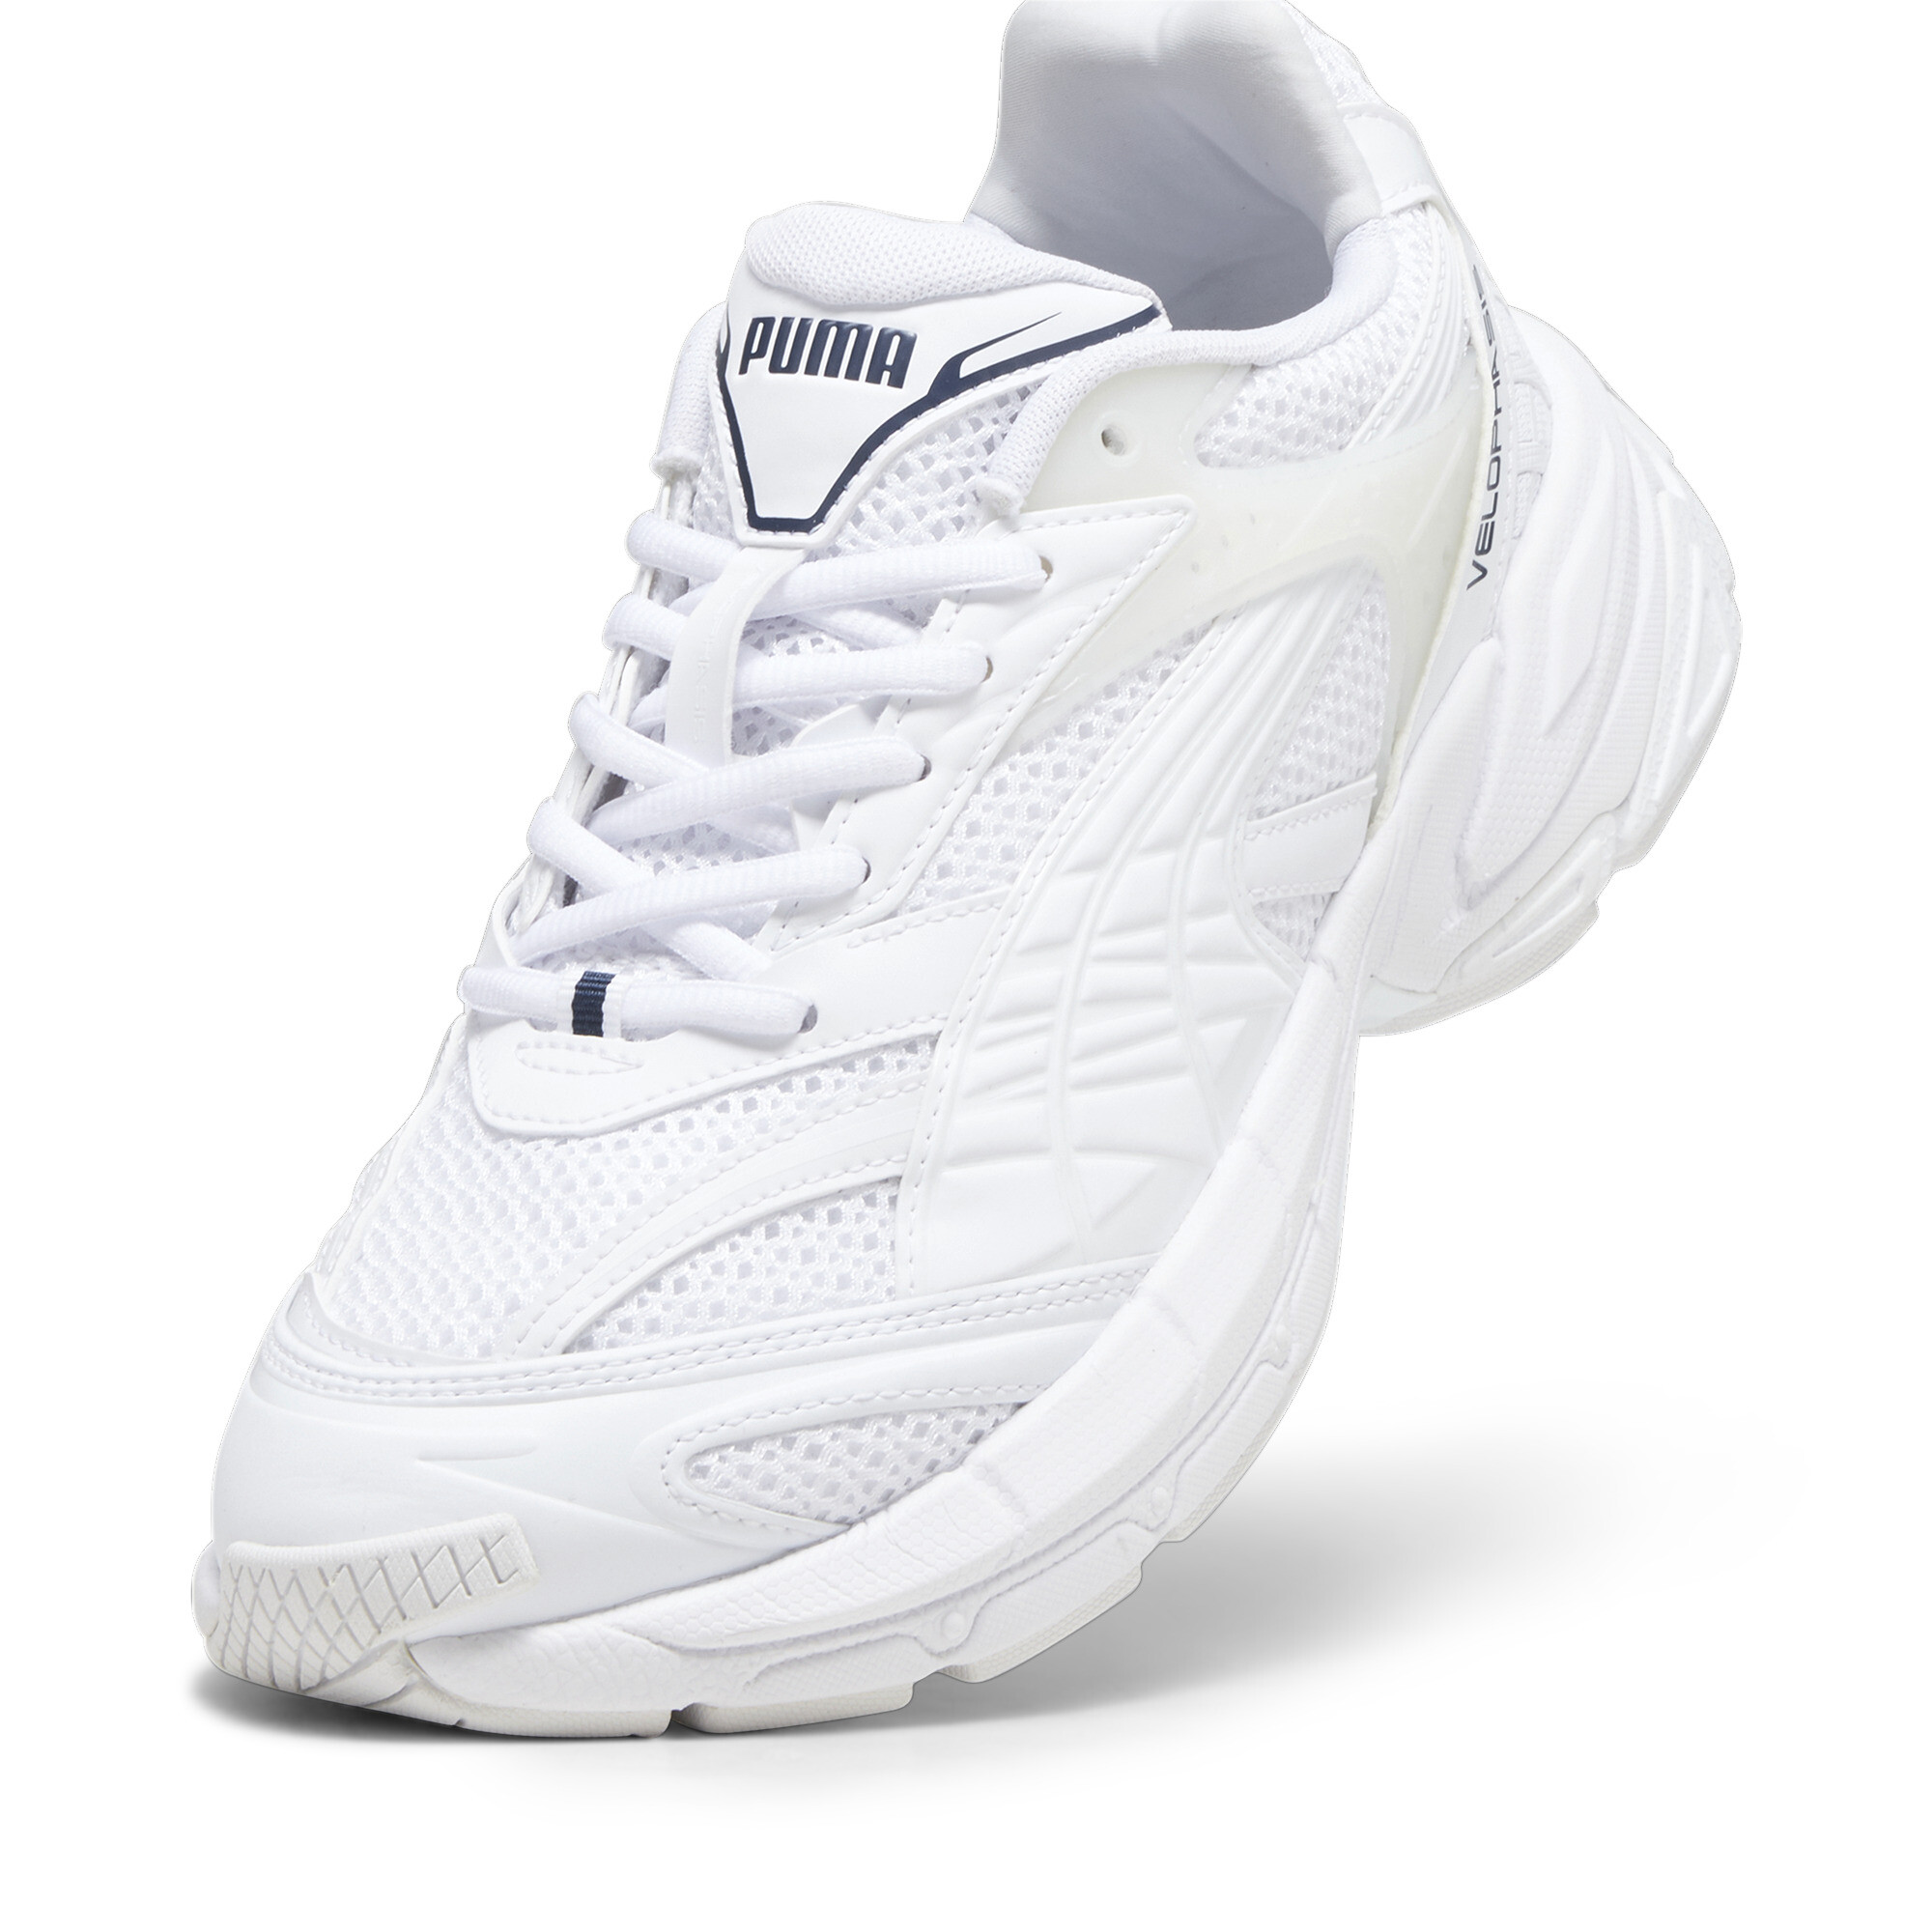 Puma Velophasis Technisch Sneakers, White, Size 40.5, Shoes